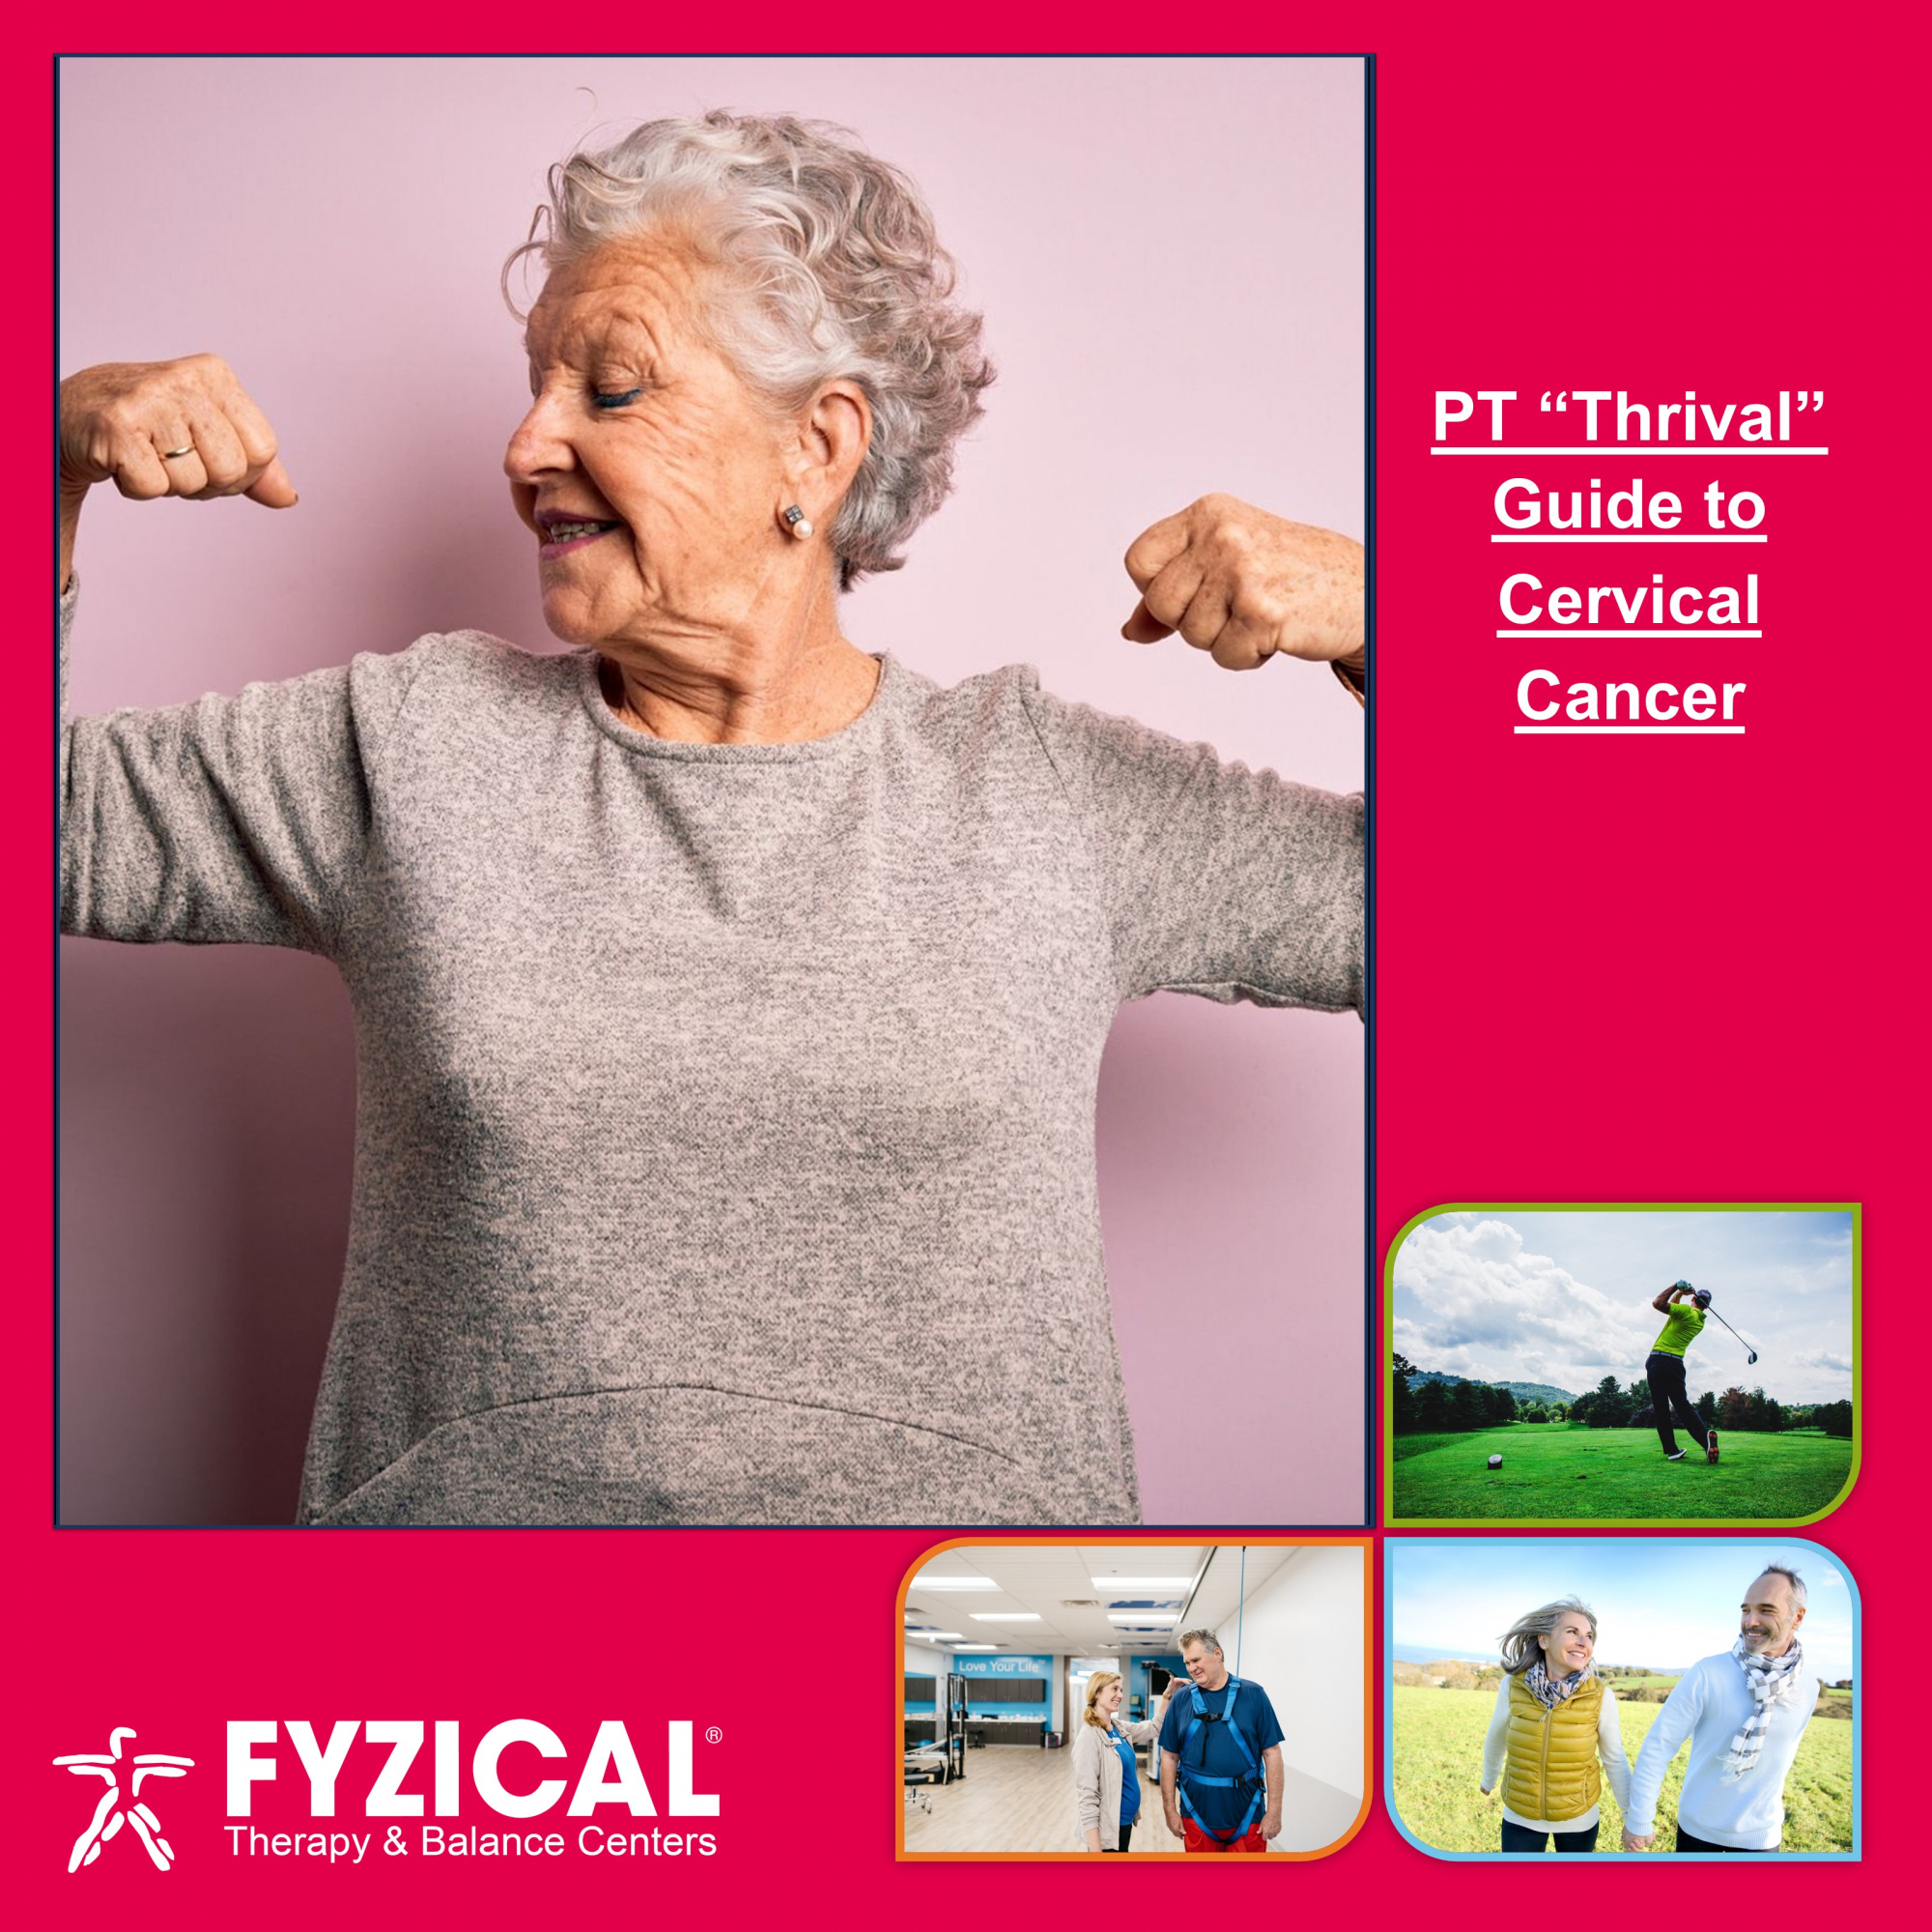 FYZICAL Oklahoma City is prepared to help you Thrive during your cervical cancer treatment. Our Pelvic Floor Physical therapists are ready to address your women's health needs and help you Love Your Life!